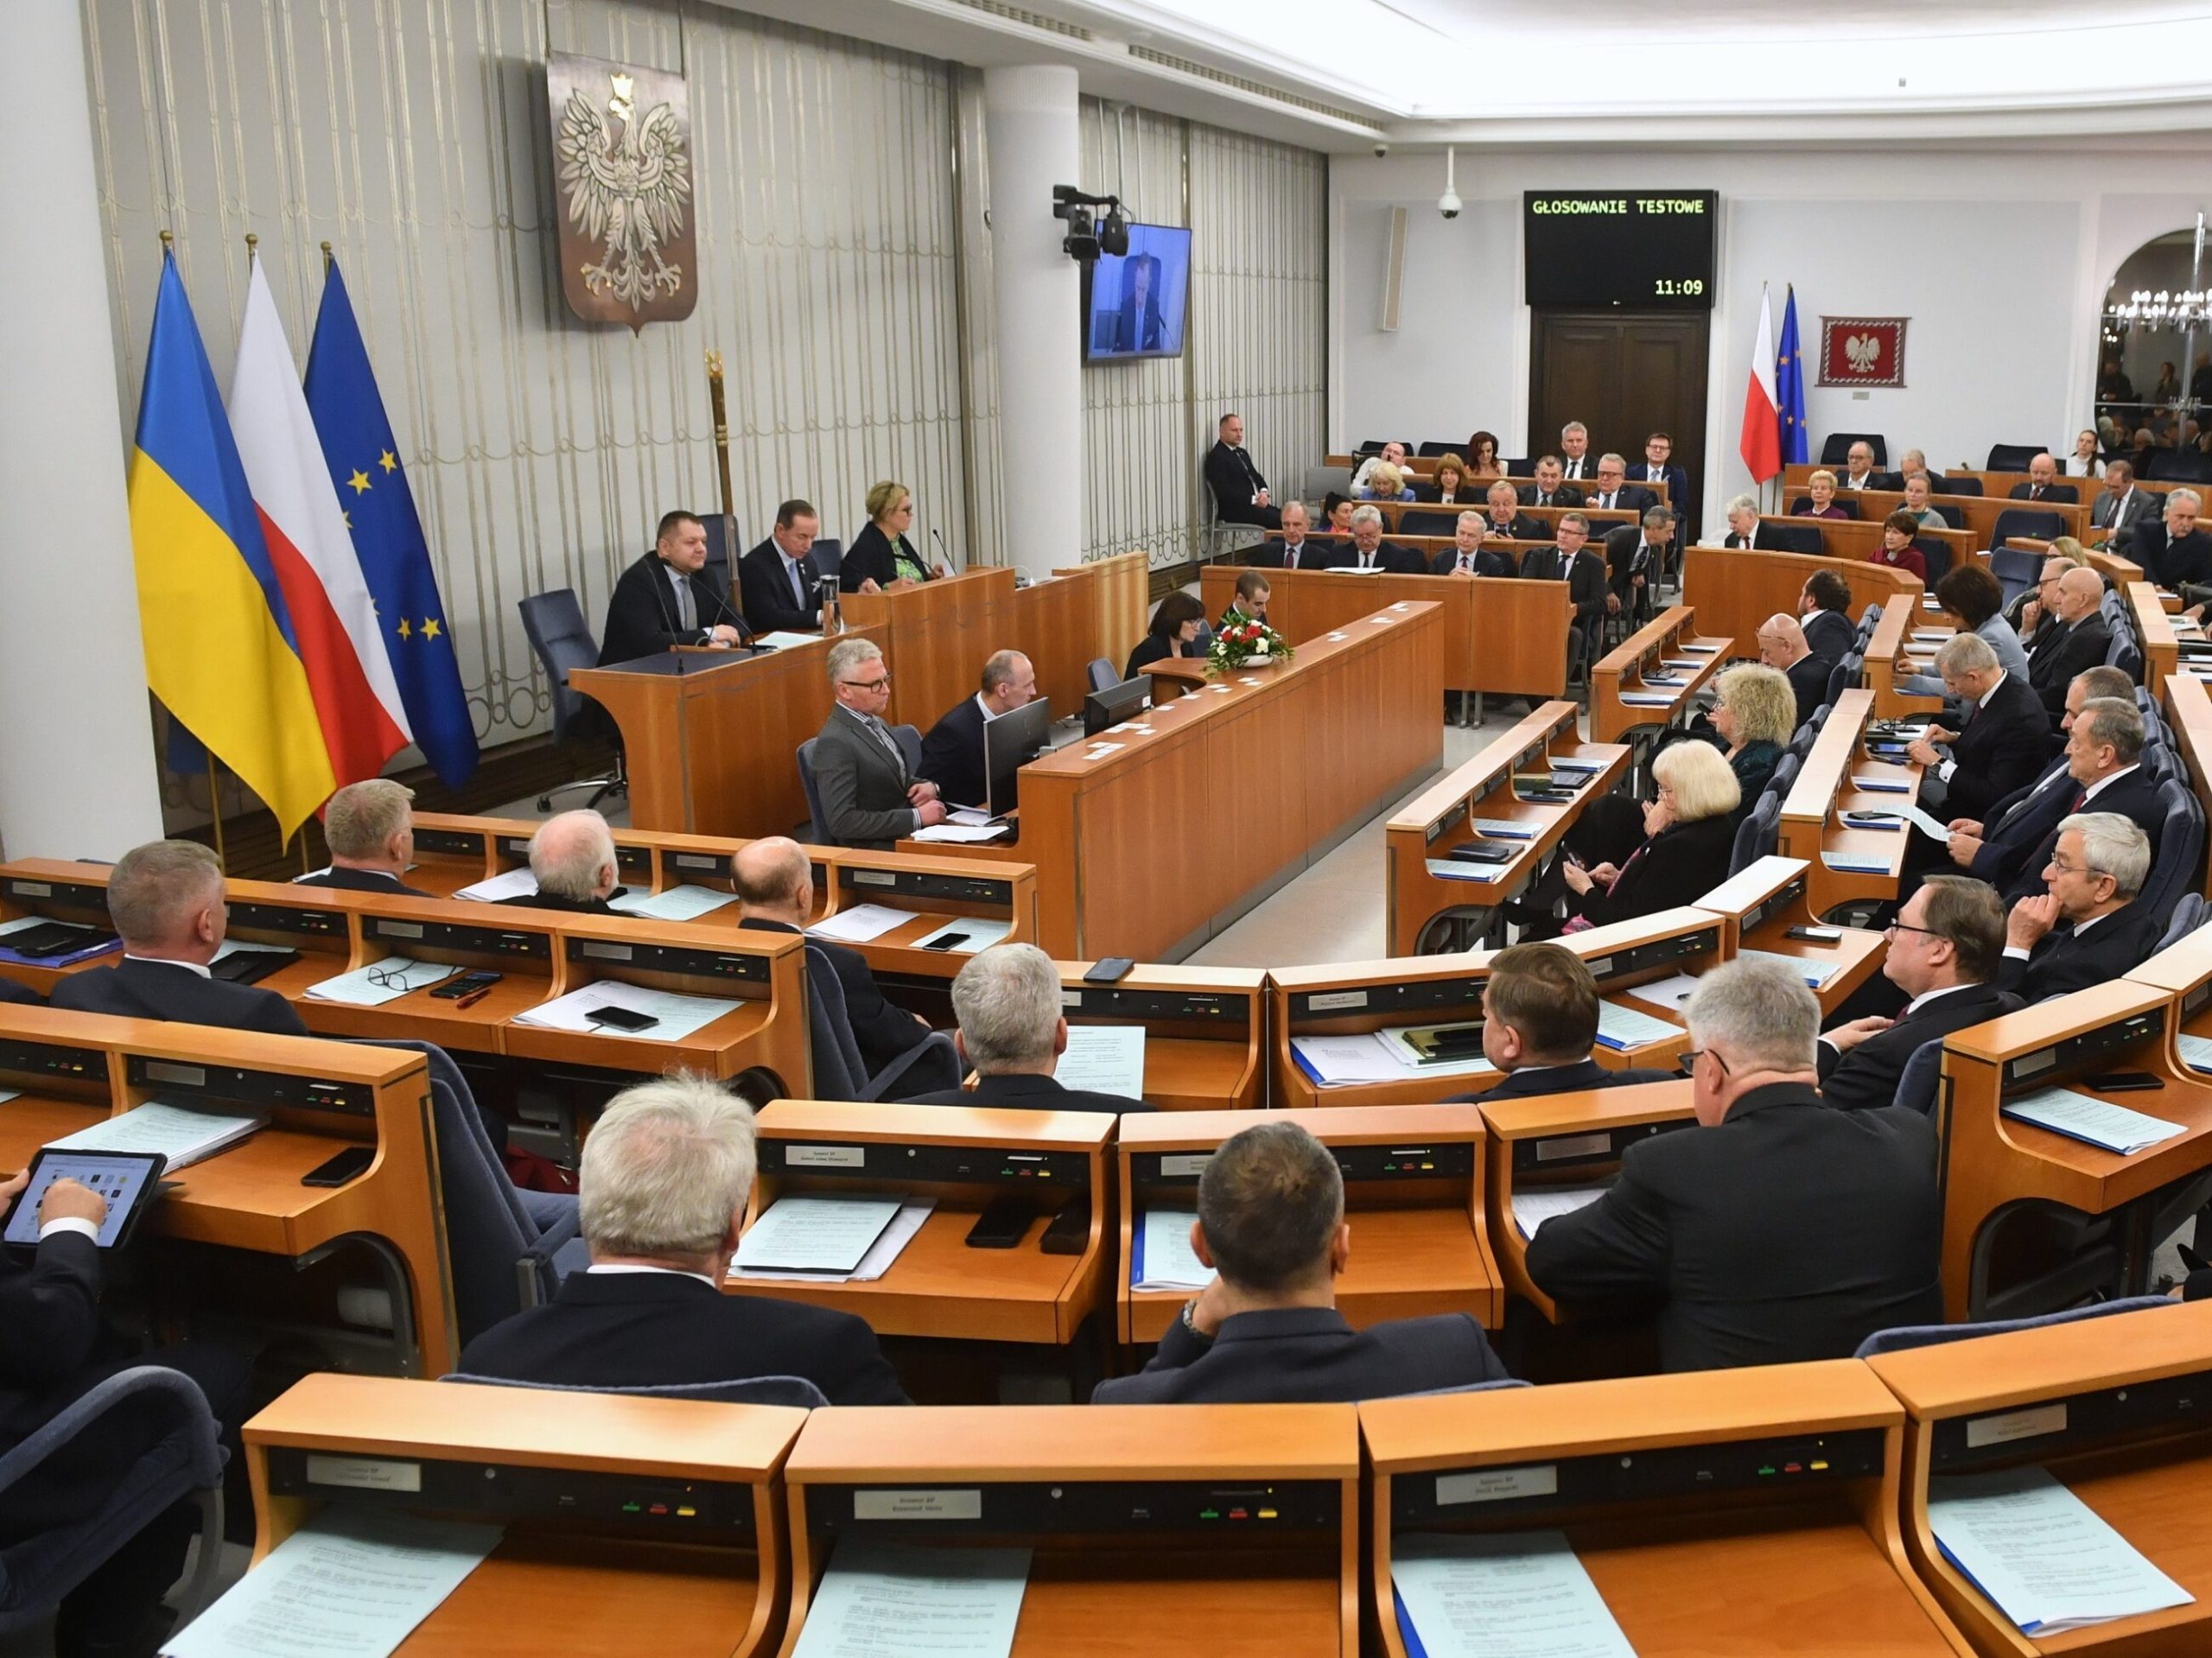 Senate office in trouble.  There is a new decision of the prosecutor